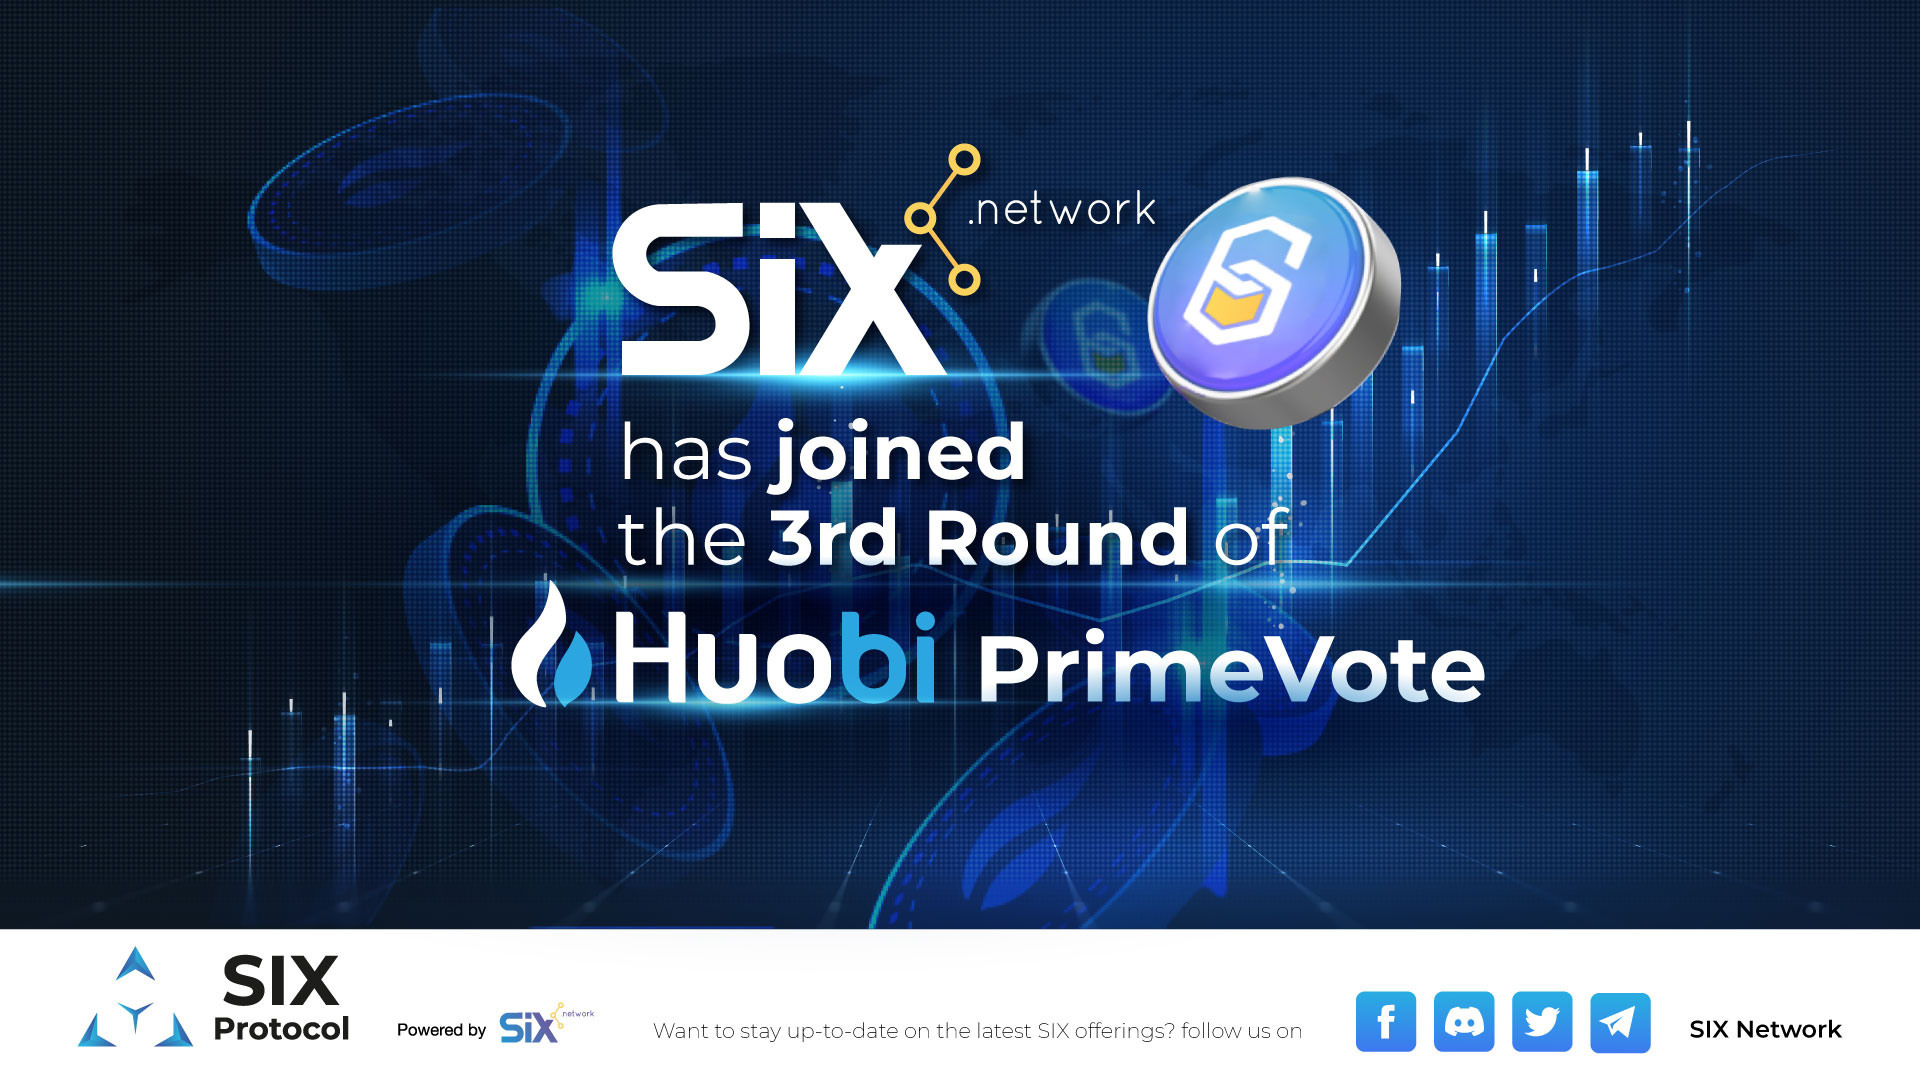 SIX Network has joined the 3rd Round of Huobi PrimeVote